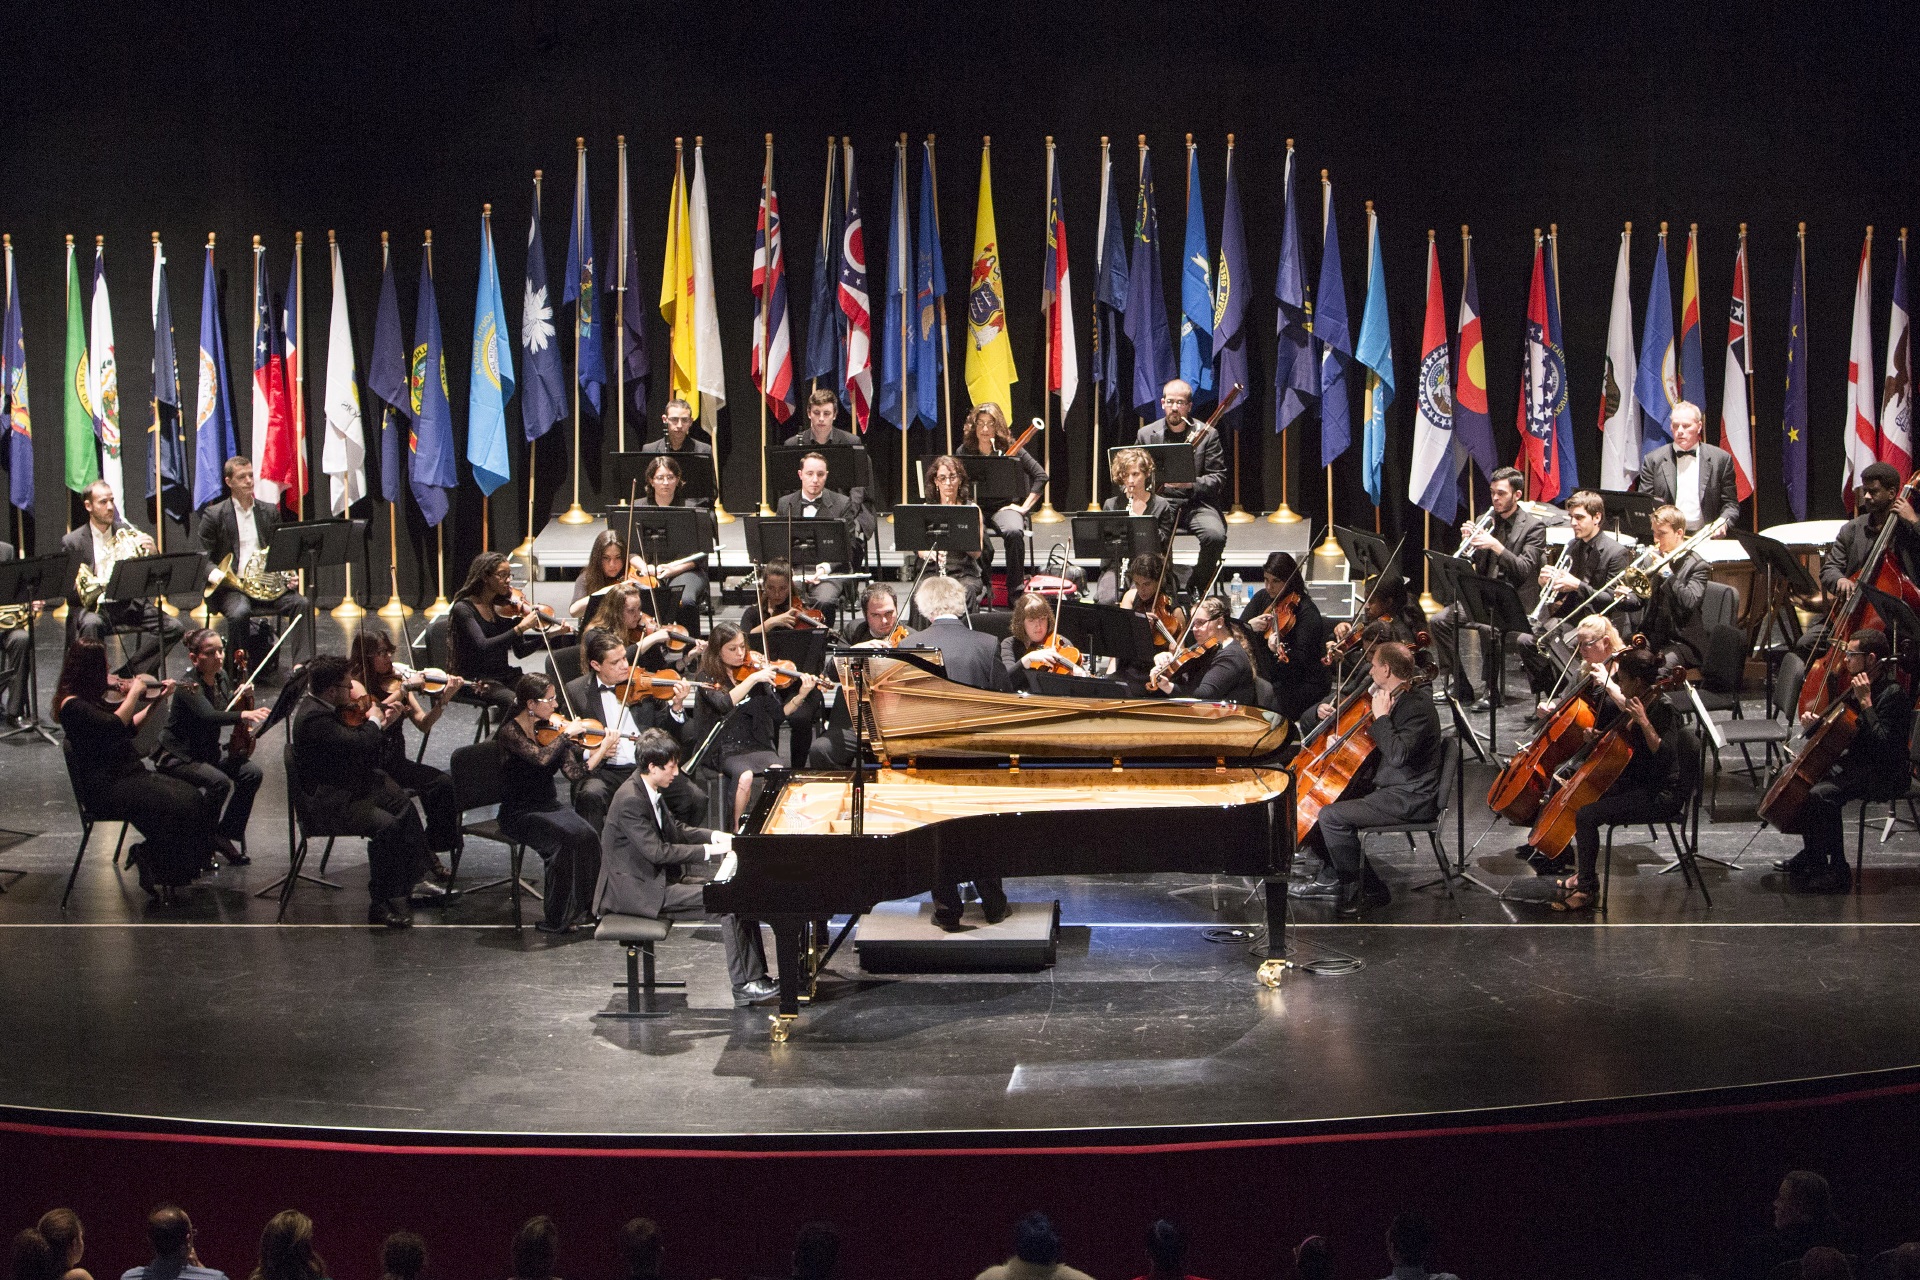 10th National Chopin Piano Competition Finals Part 2 and Award Ceremony